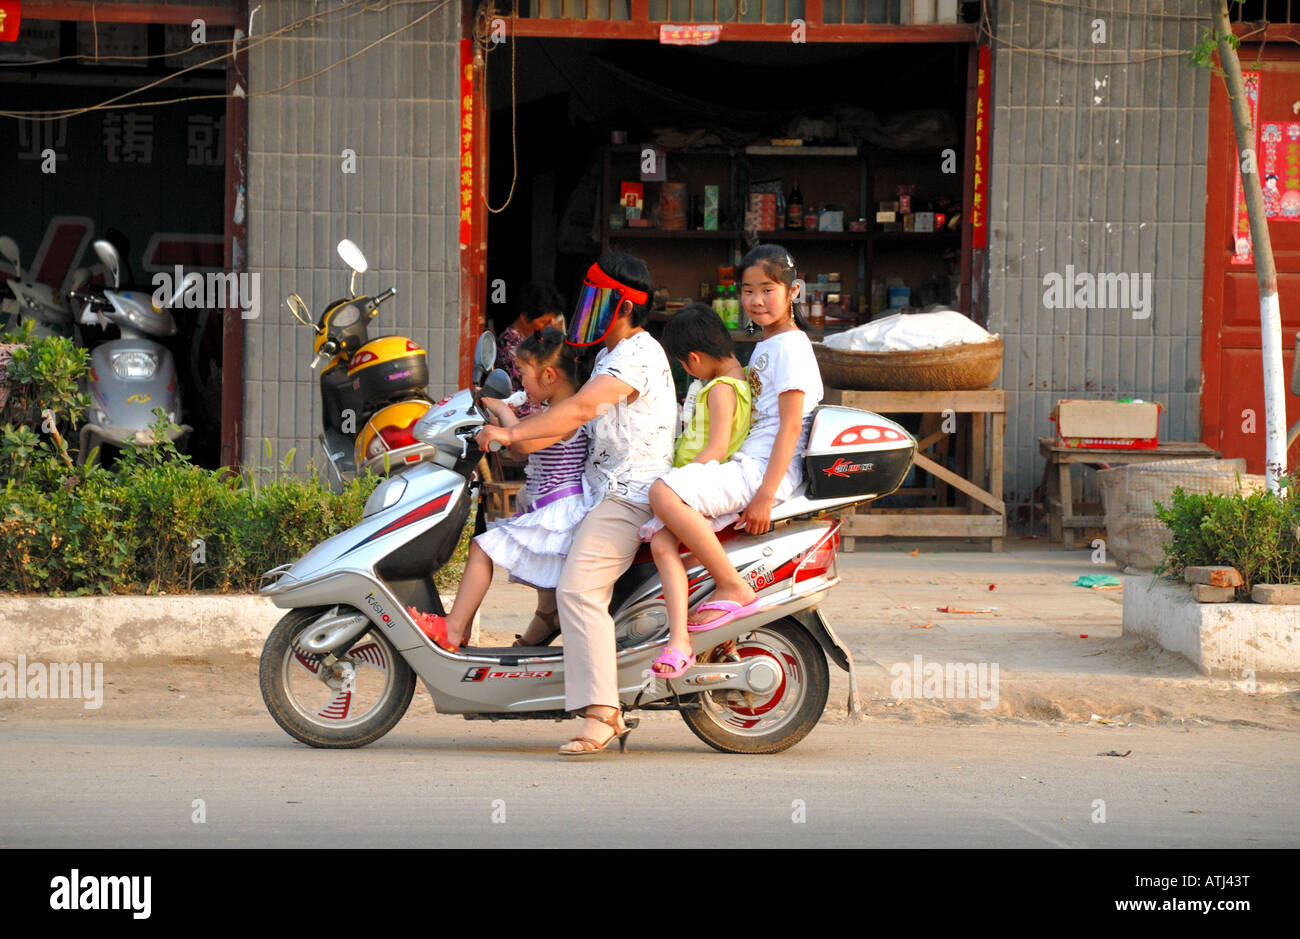 Four people moving off on a scooter on road by Taiqing Palace Square Kaifeng Henan Province China Asia Stock Photo